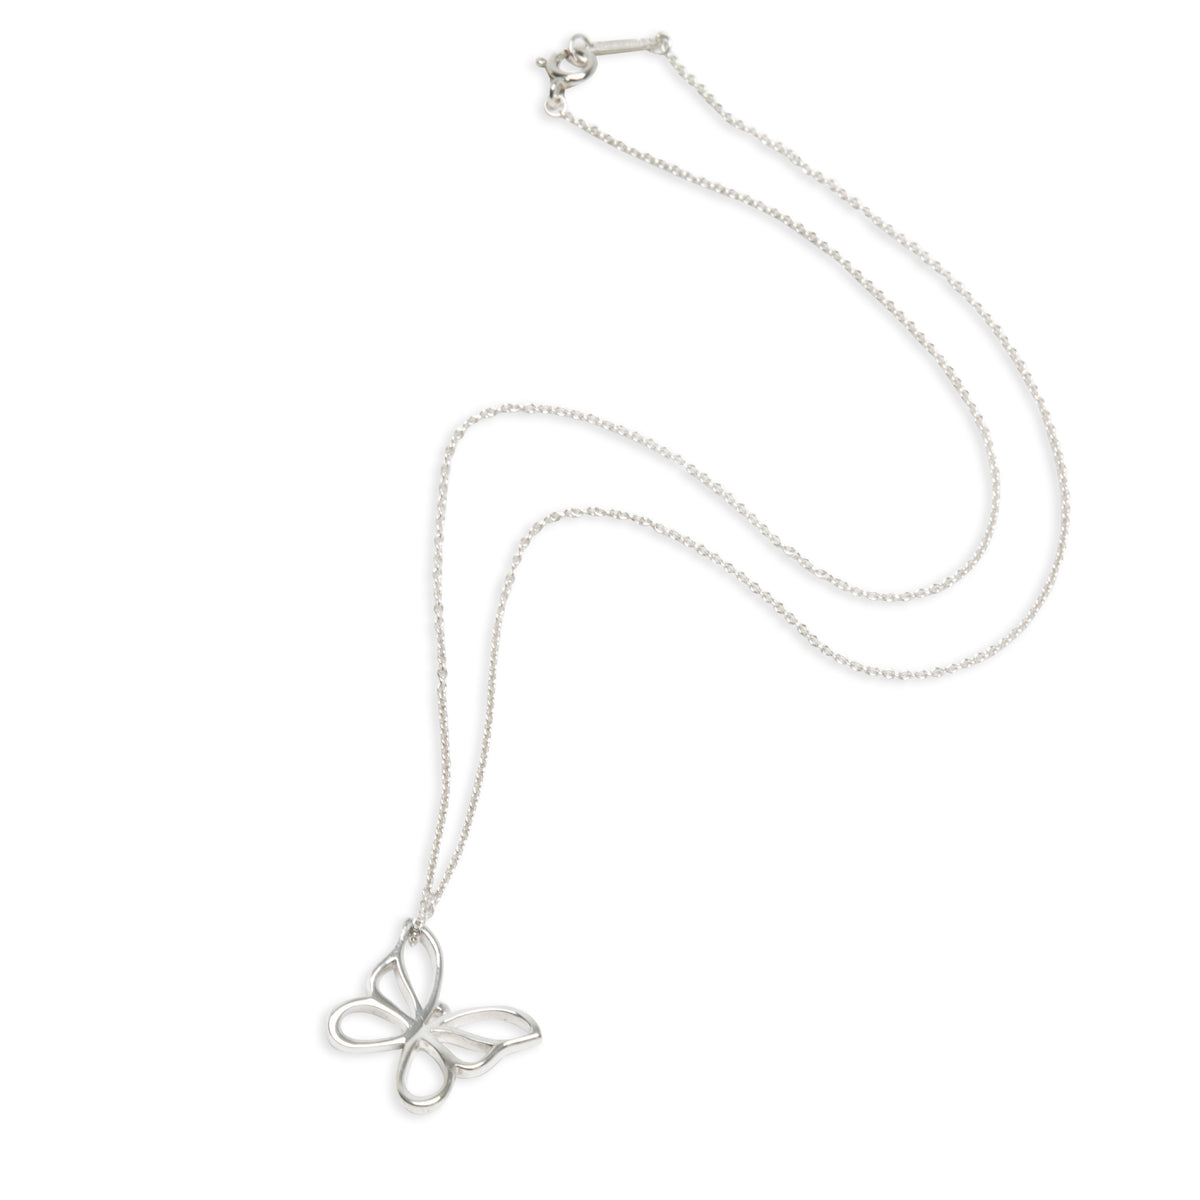 Tiffany & Co. Butterfly Necklace in Sterling Silver